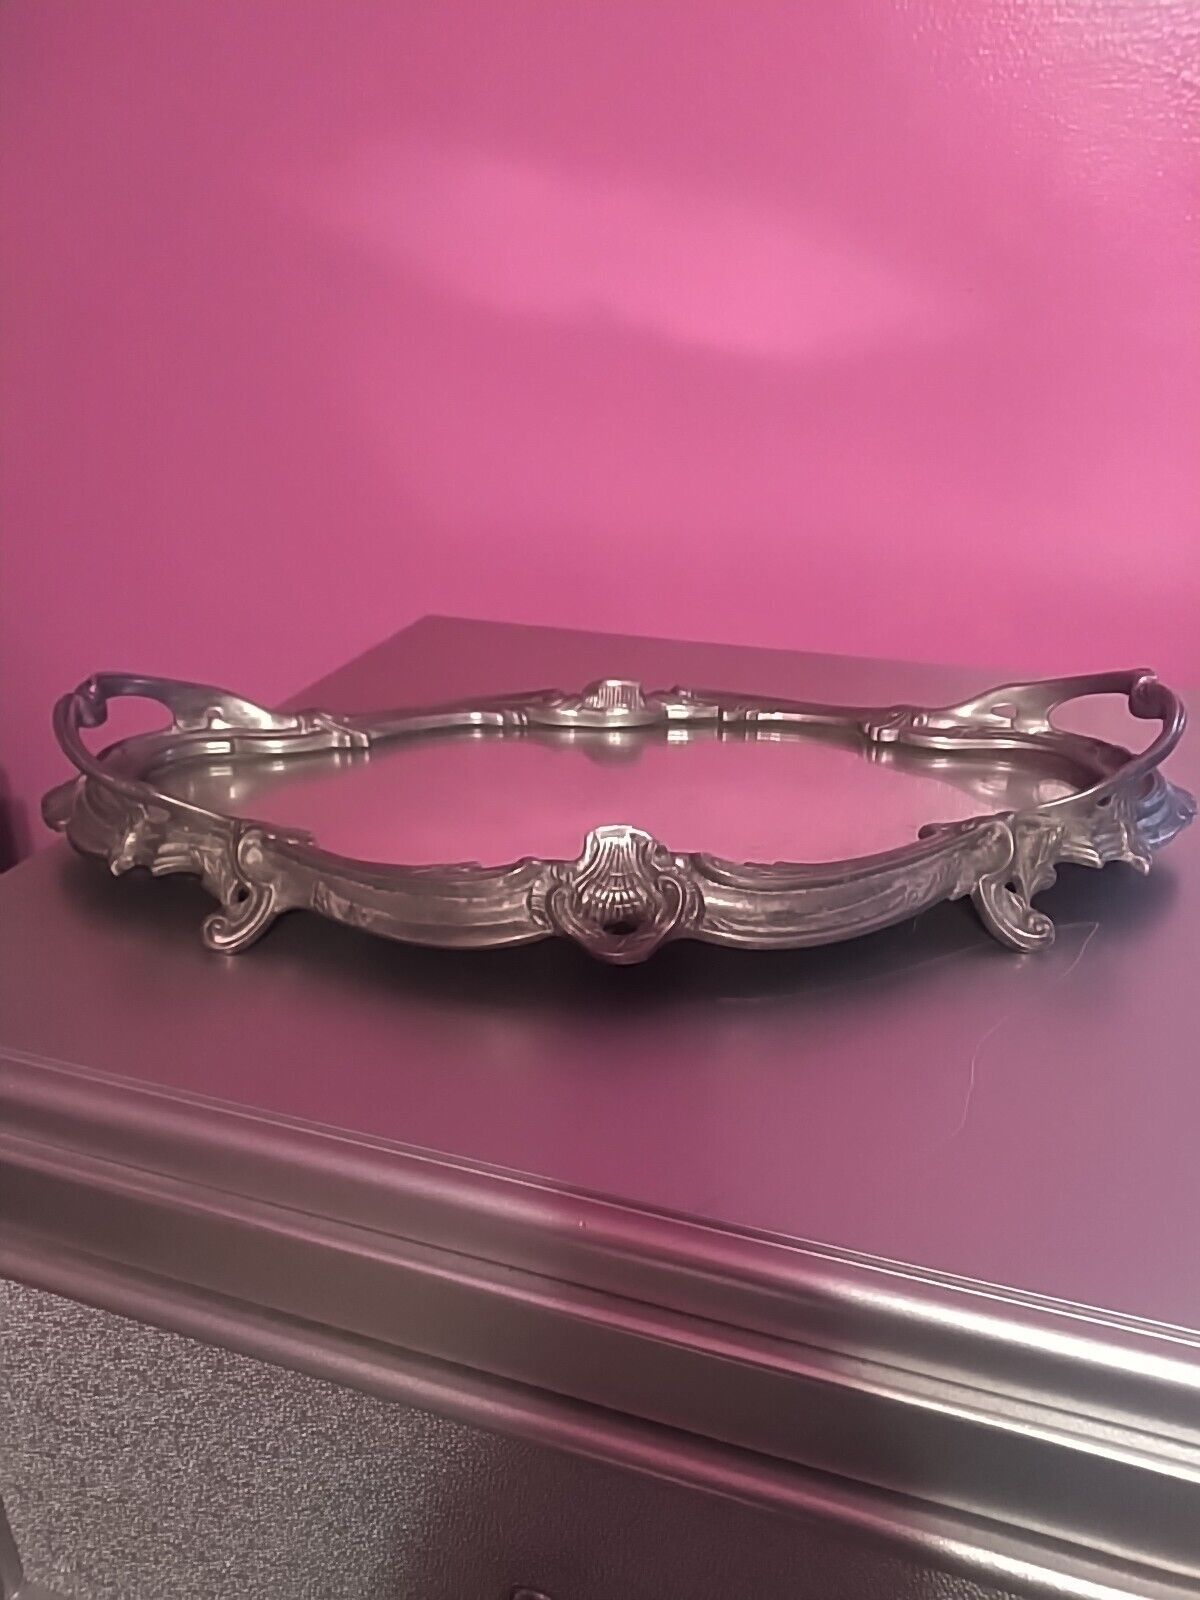 Vintage Castilian Imports 17 Inch Mirrored Tray With Handles